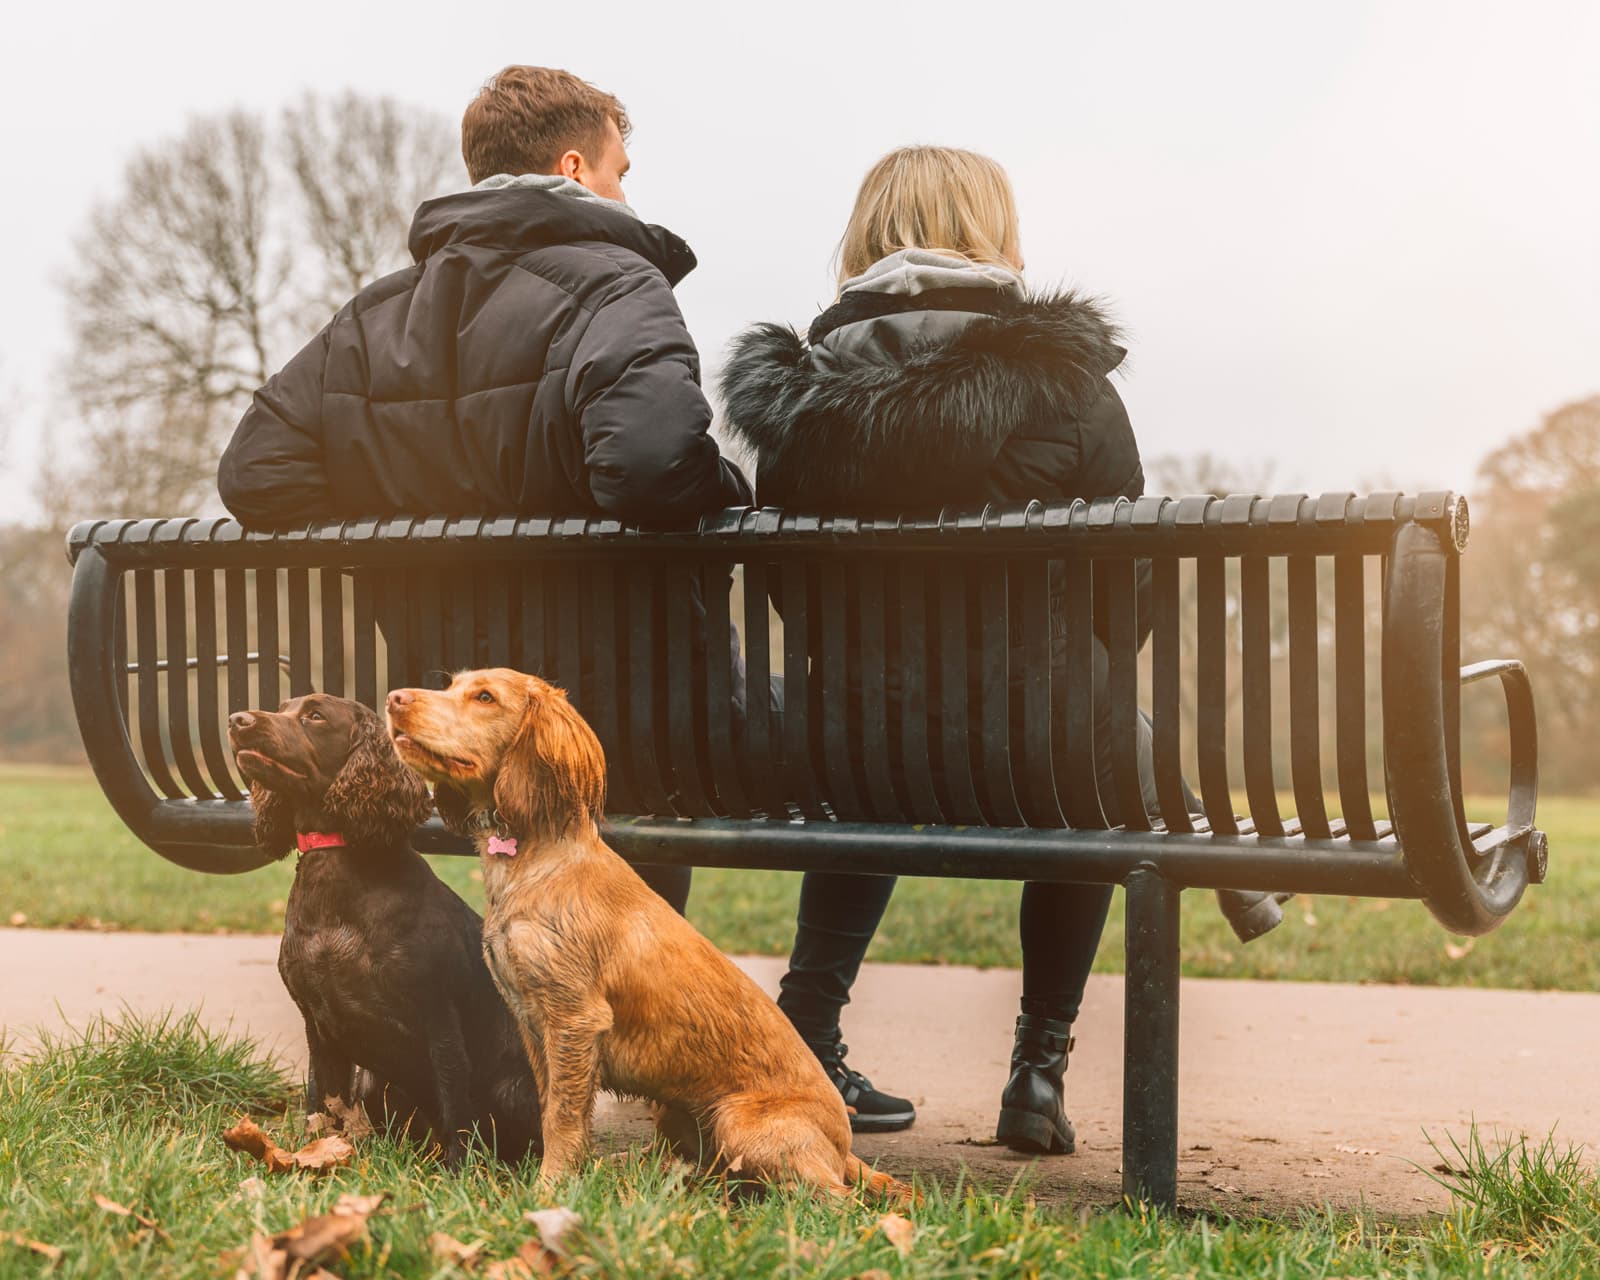 Dating in park with two dogs